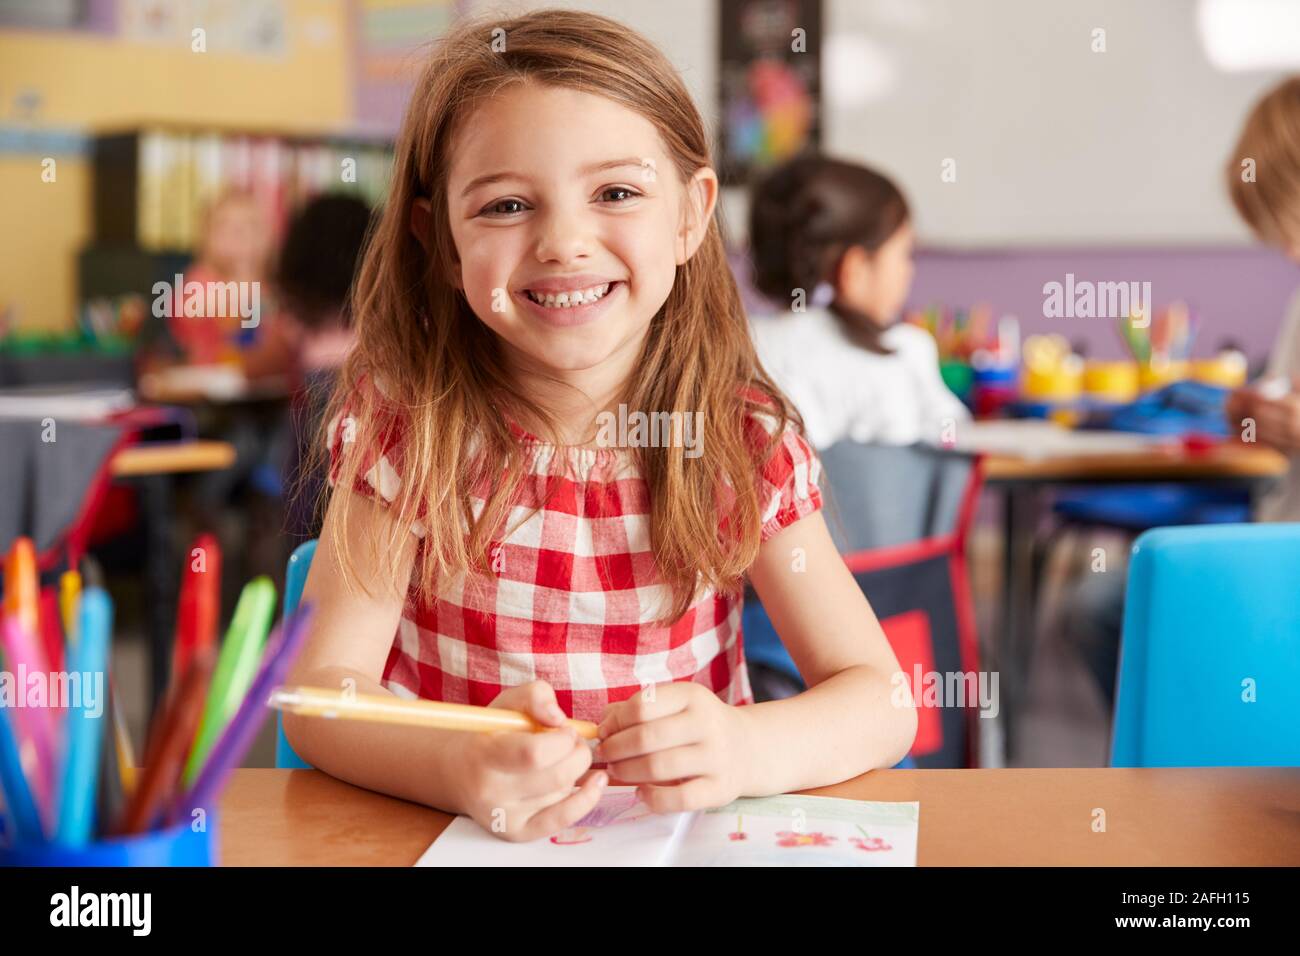 Portrait Of Smiling Female Elementary School Pupil Working At Desk Stock Photo